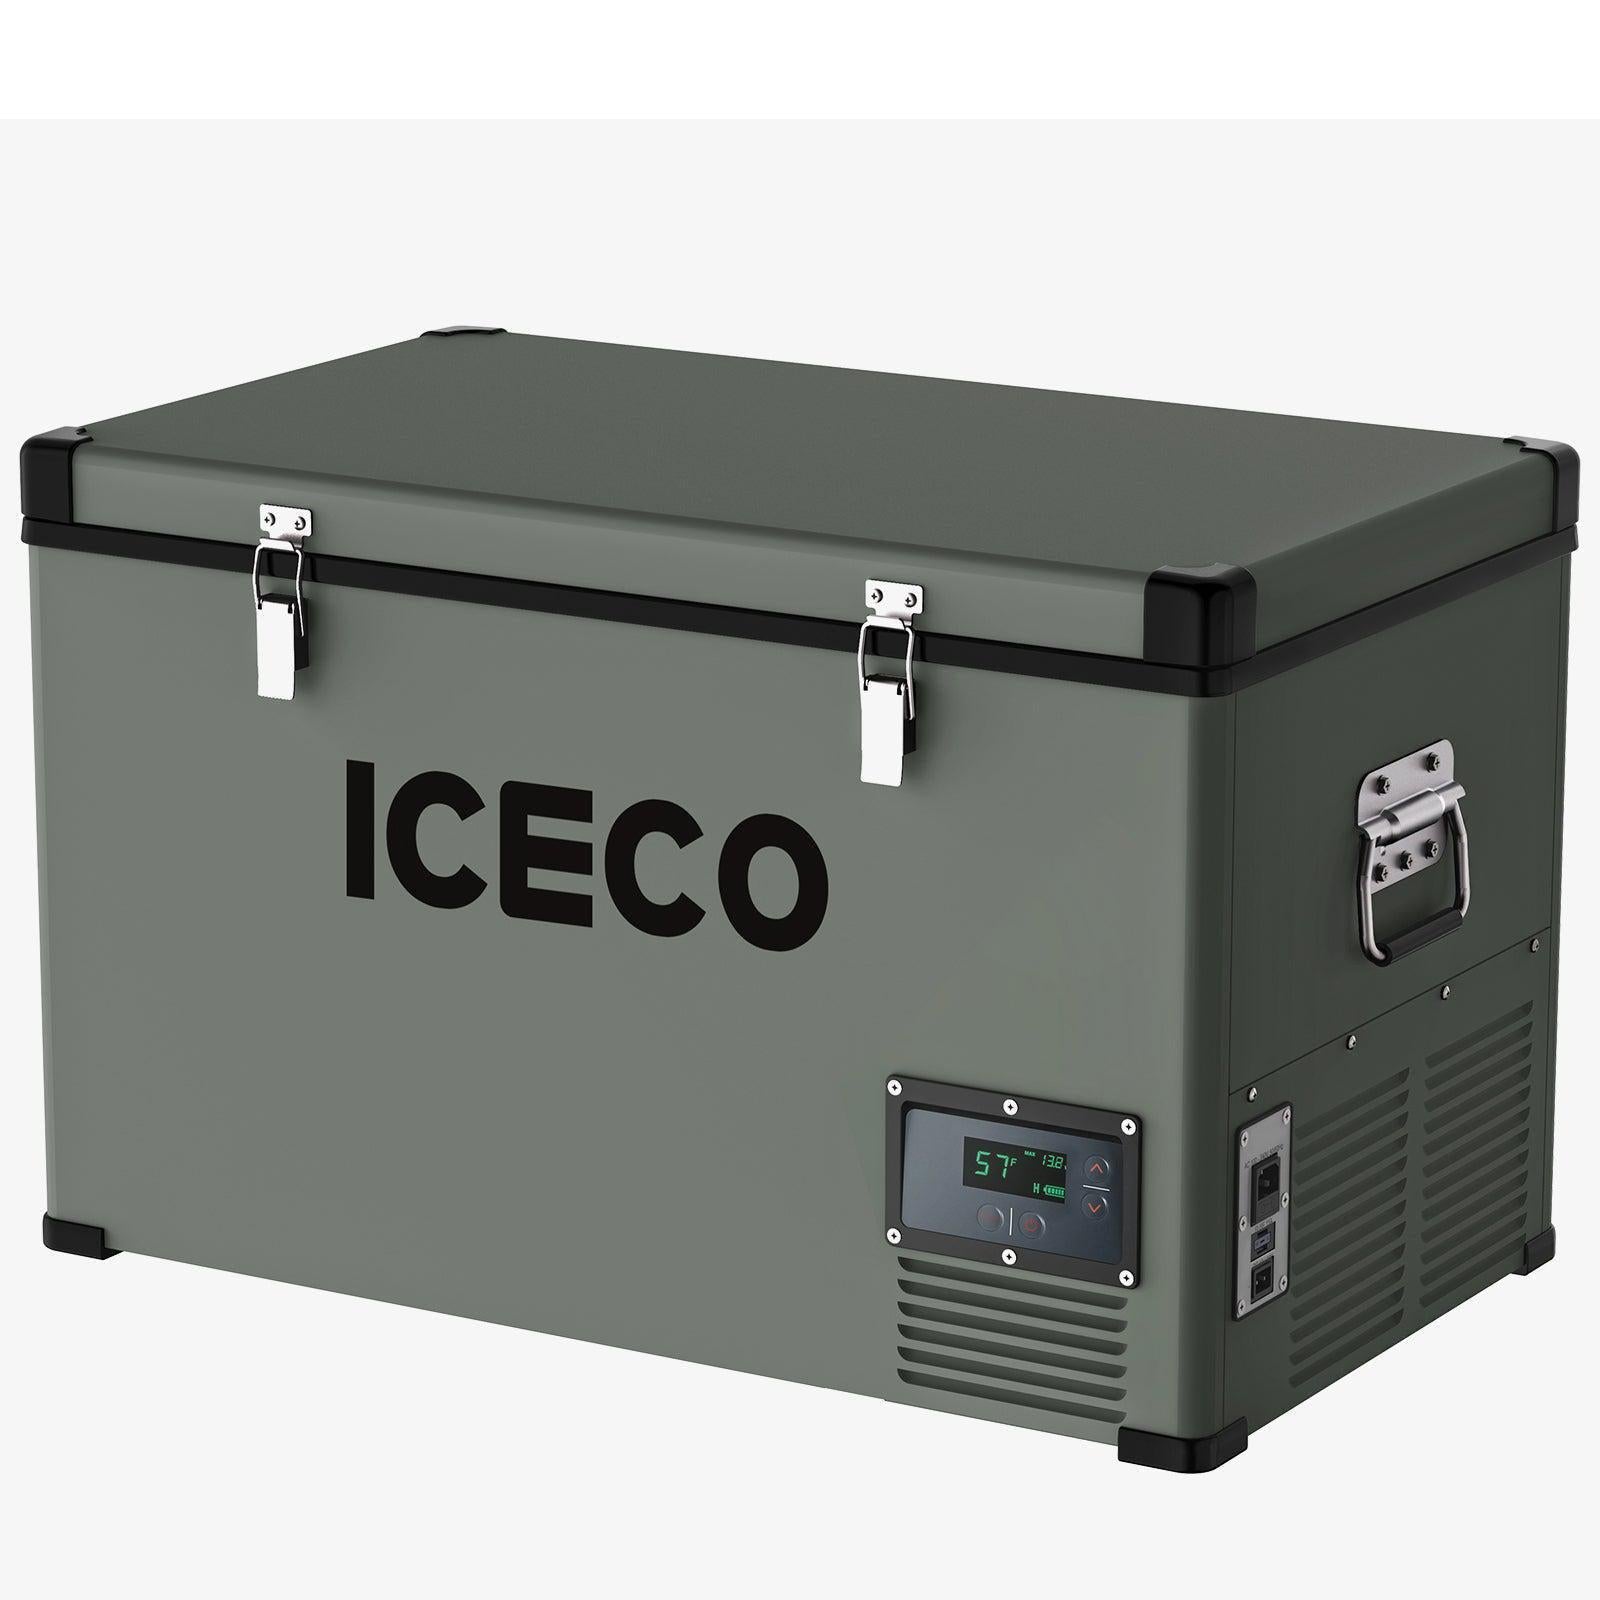 iceco fridge、plug in cooler、thermoelectric cooling、rv fridge 12v